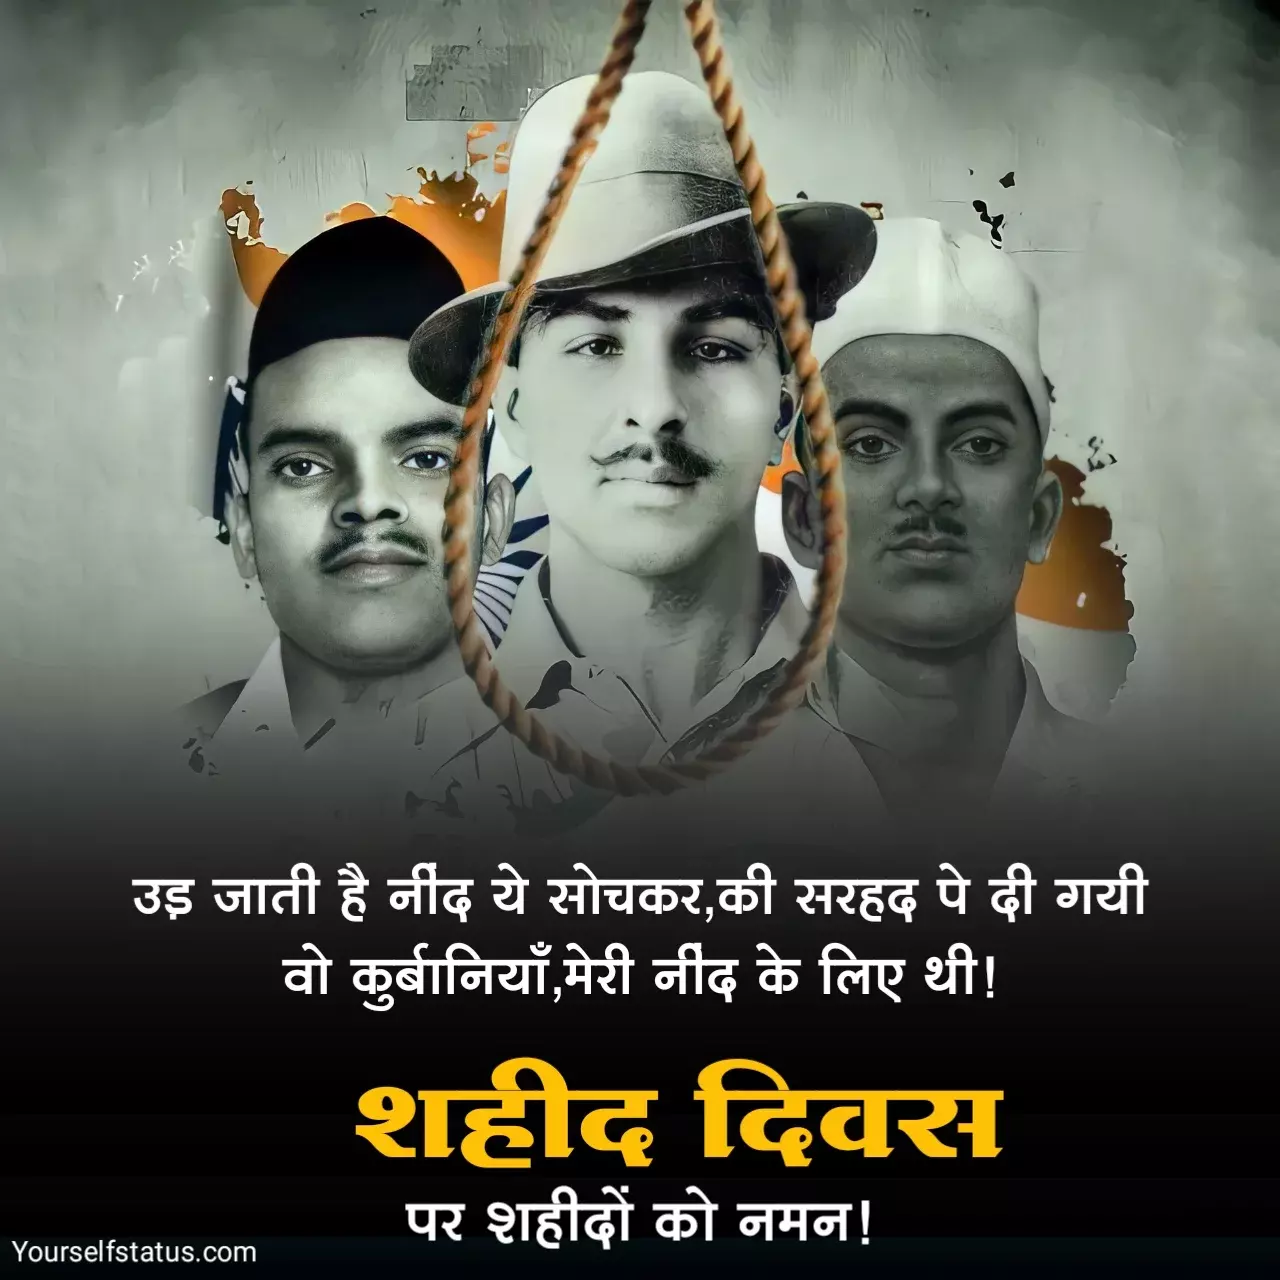 Martyrs Day quotes in hindi